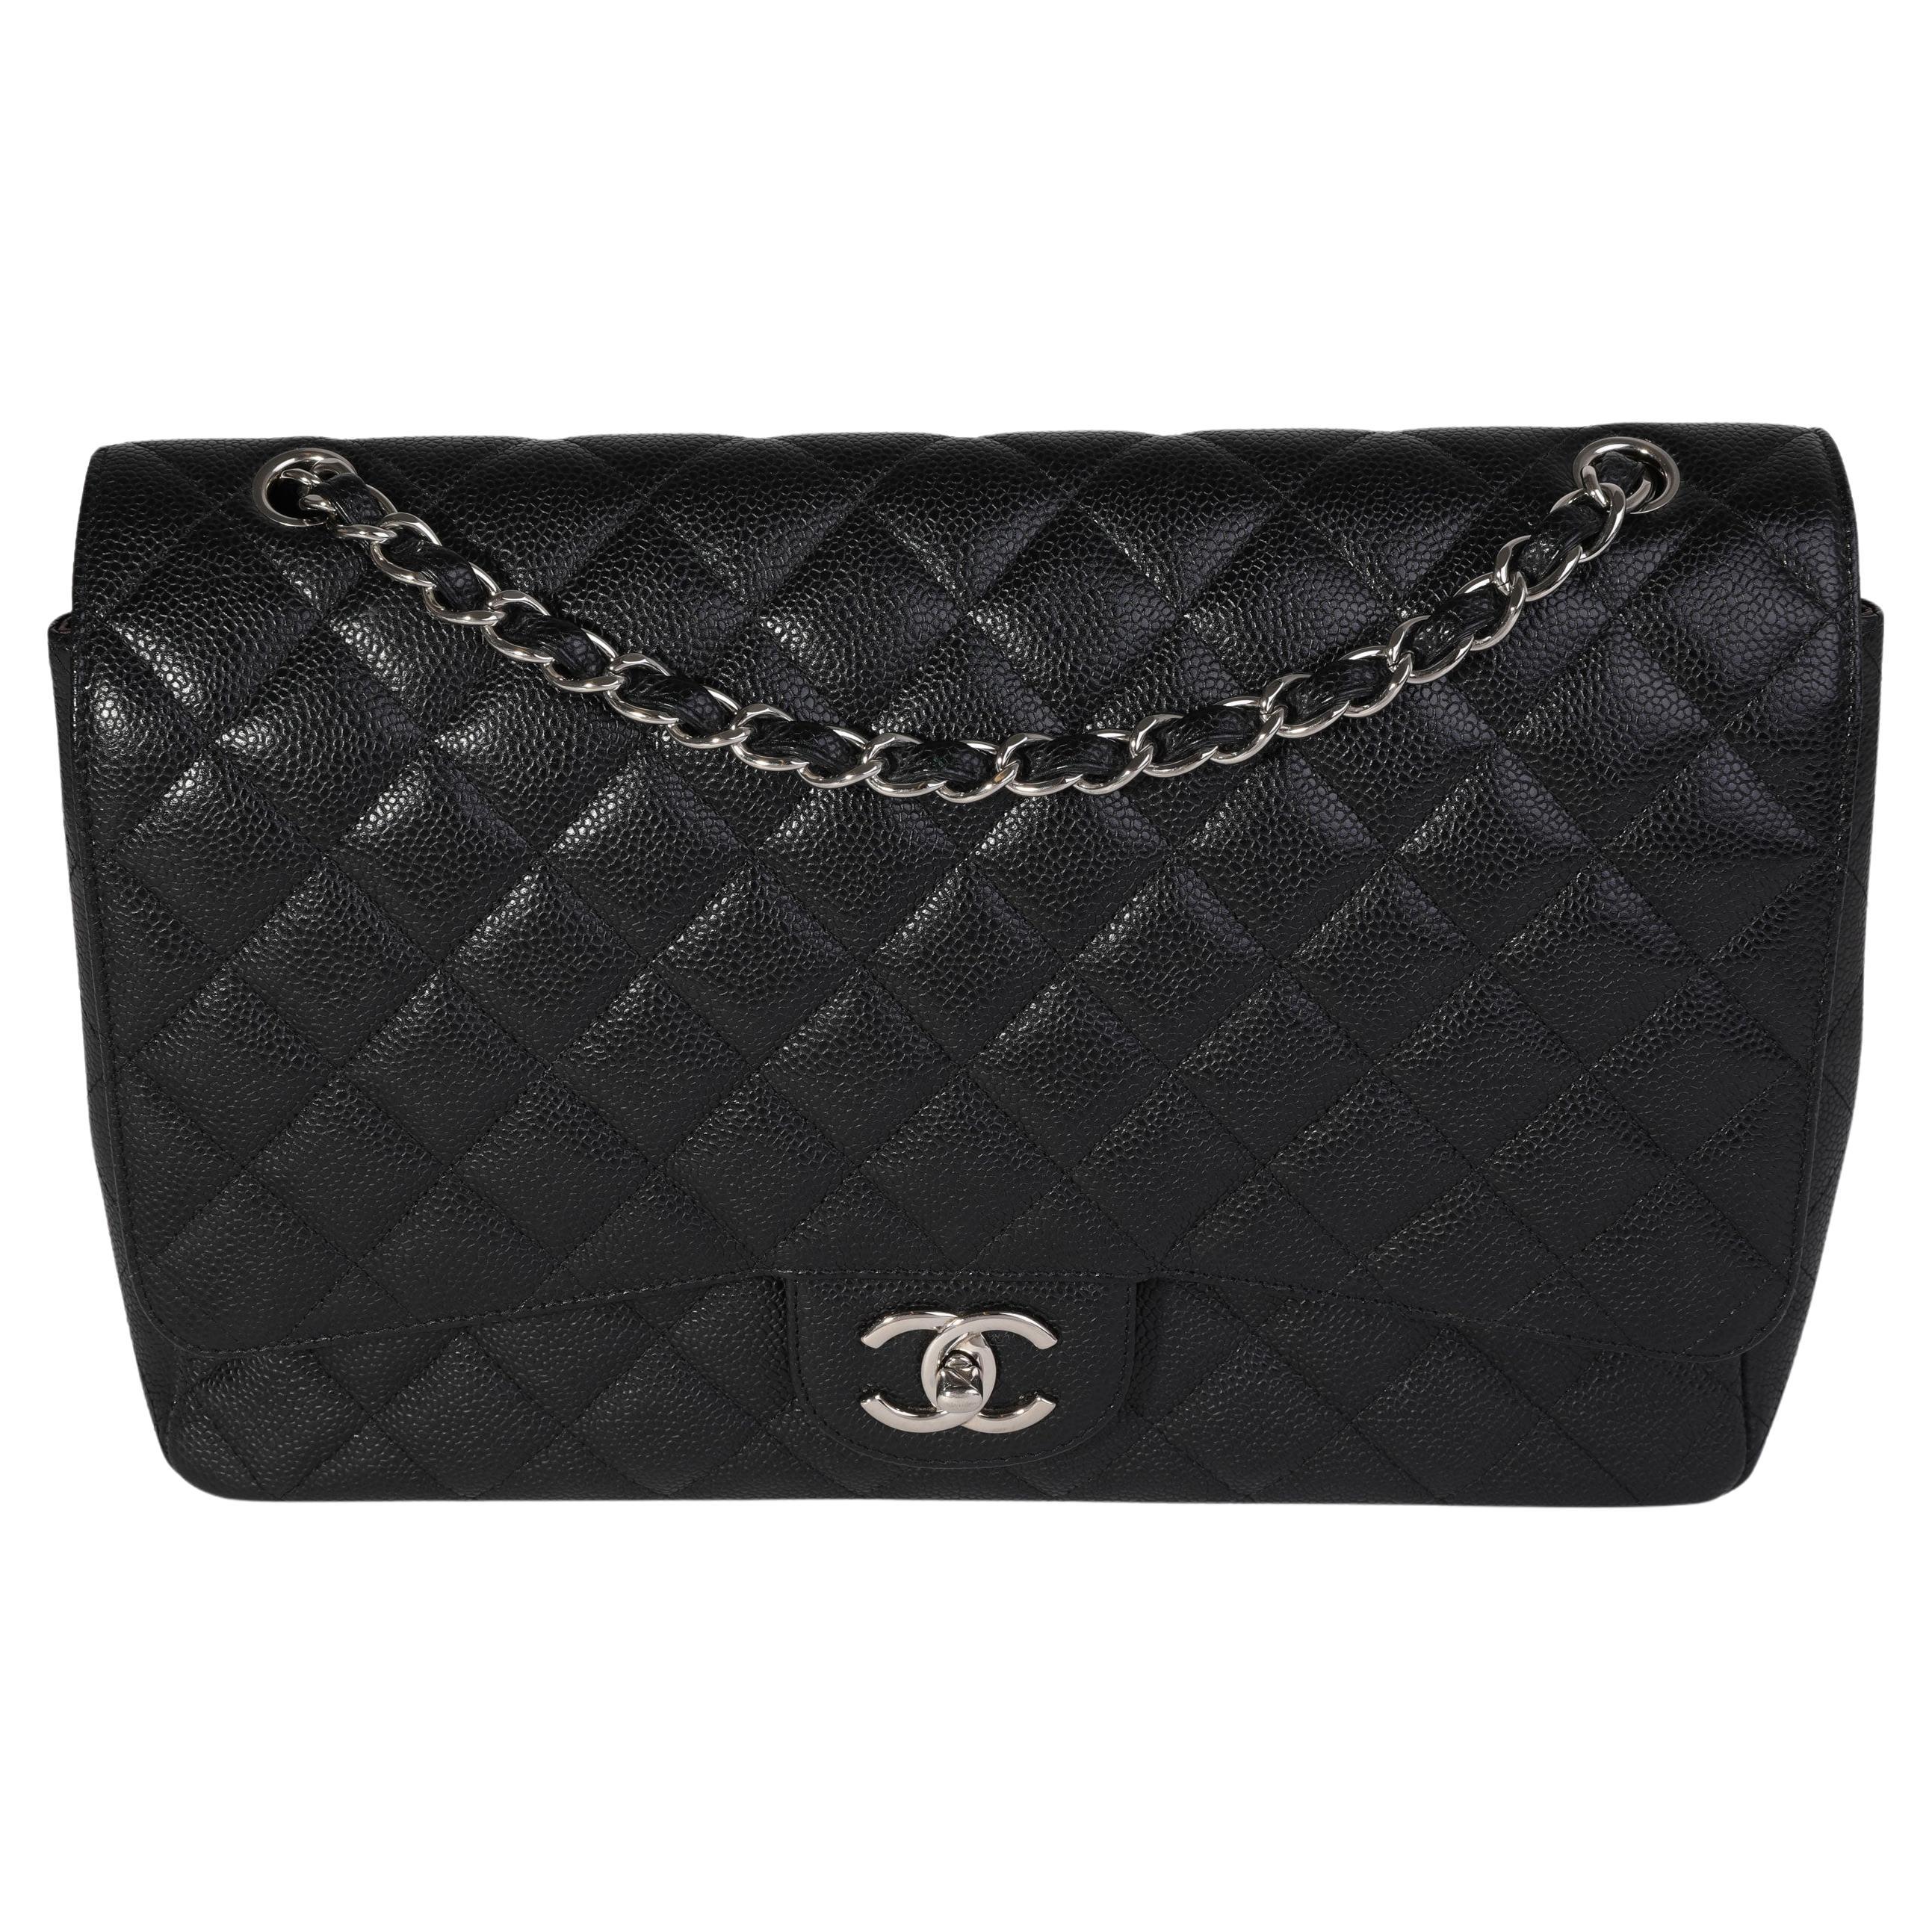 Chanel Black Quilted Caviar Maxi Classic Double Flap Bag